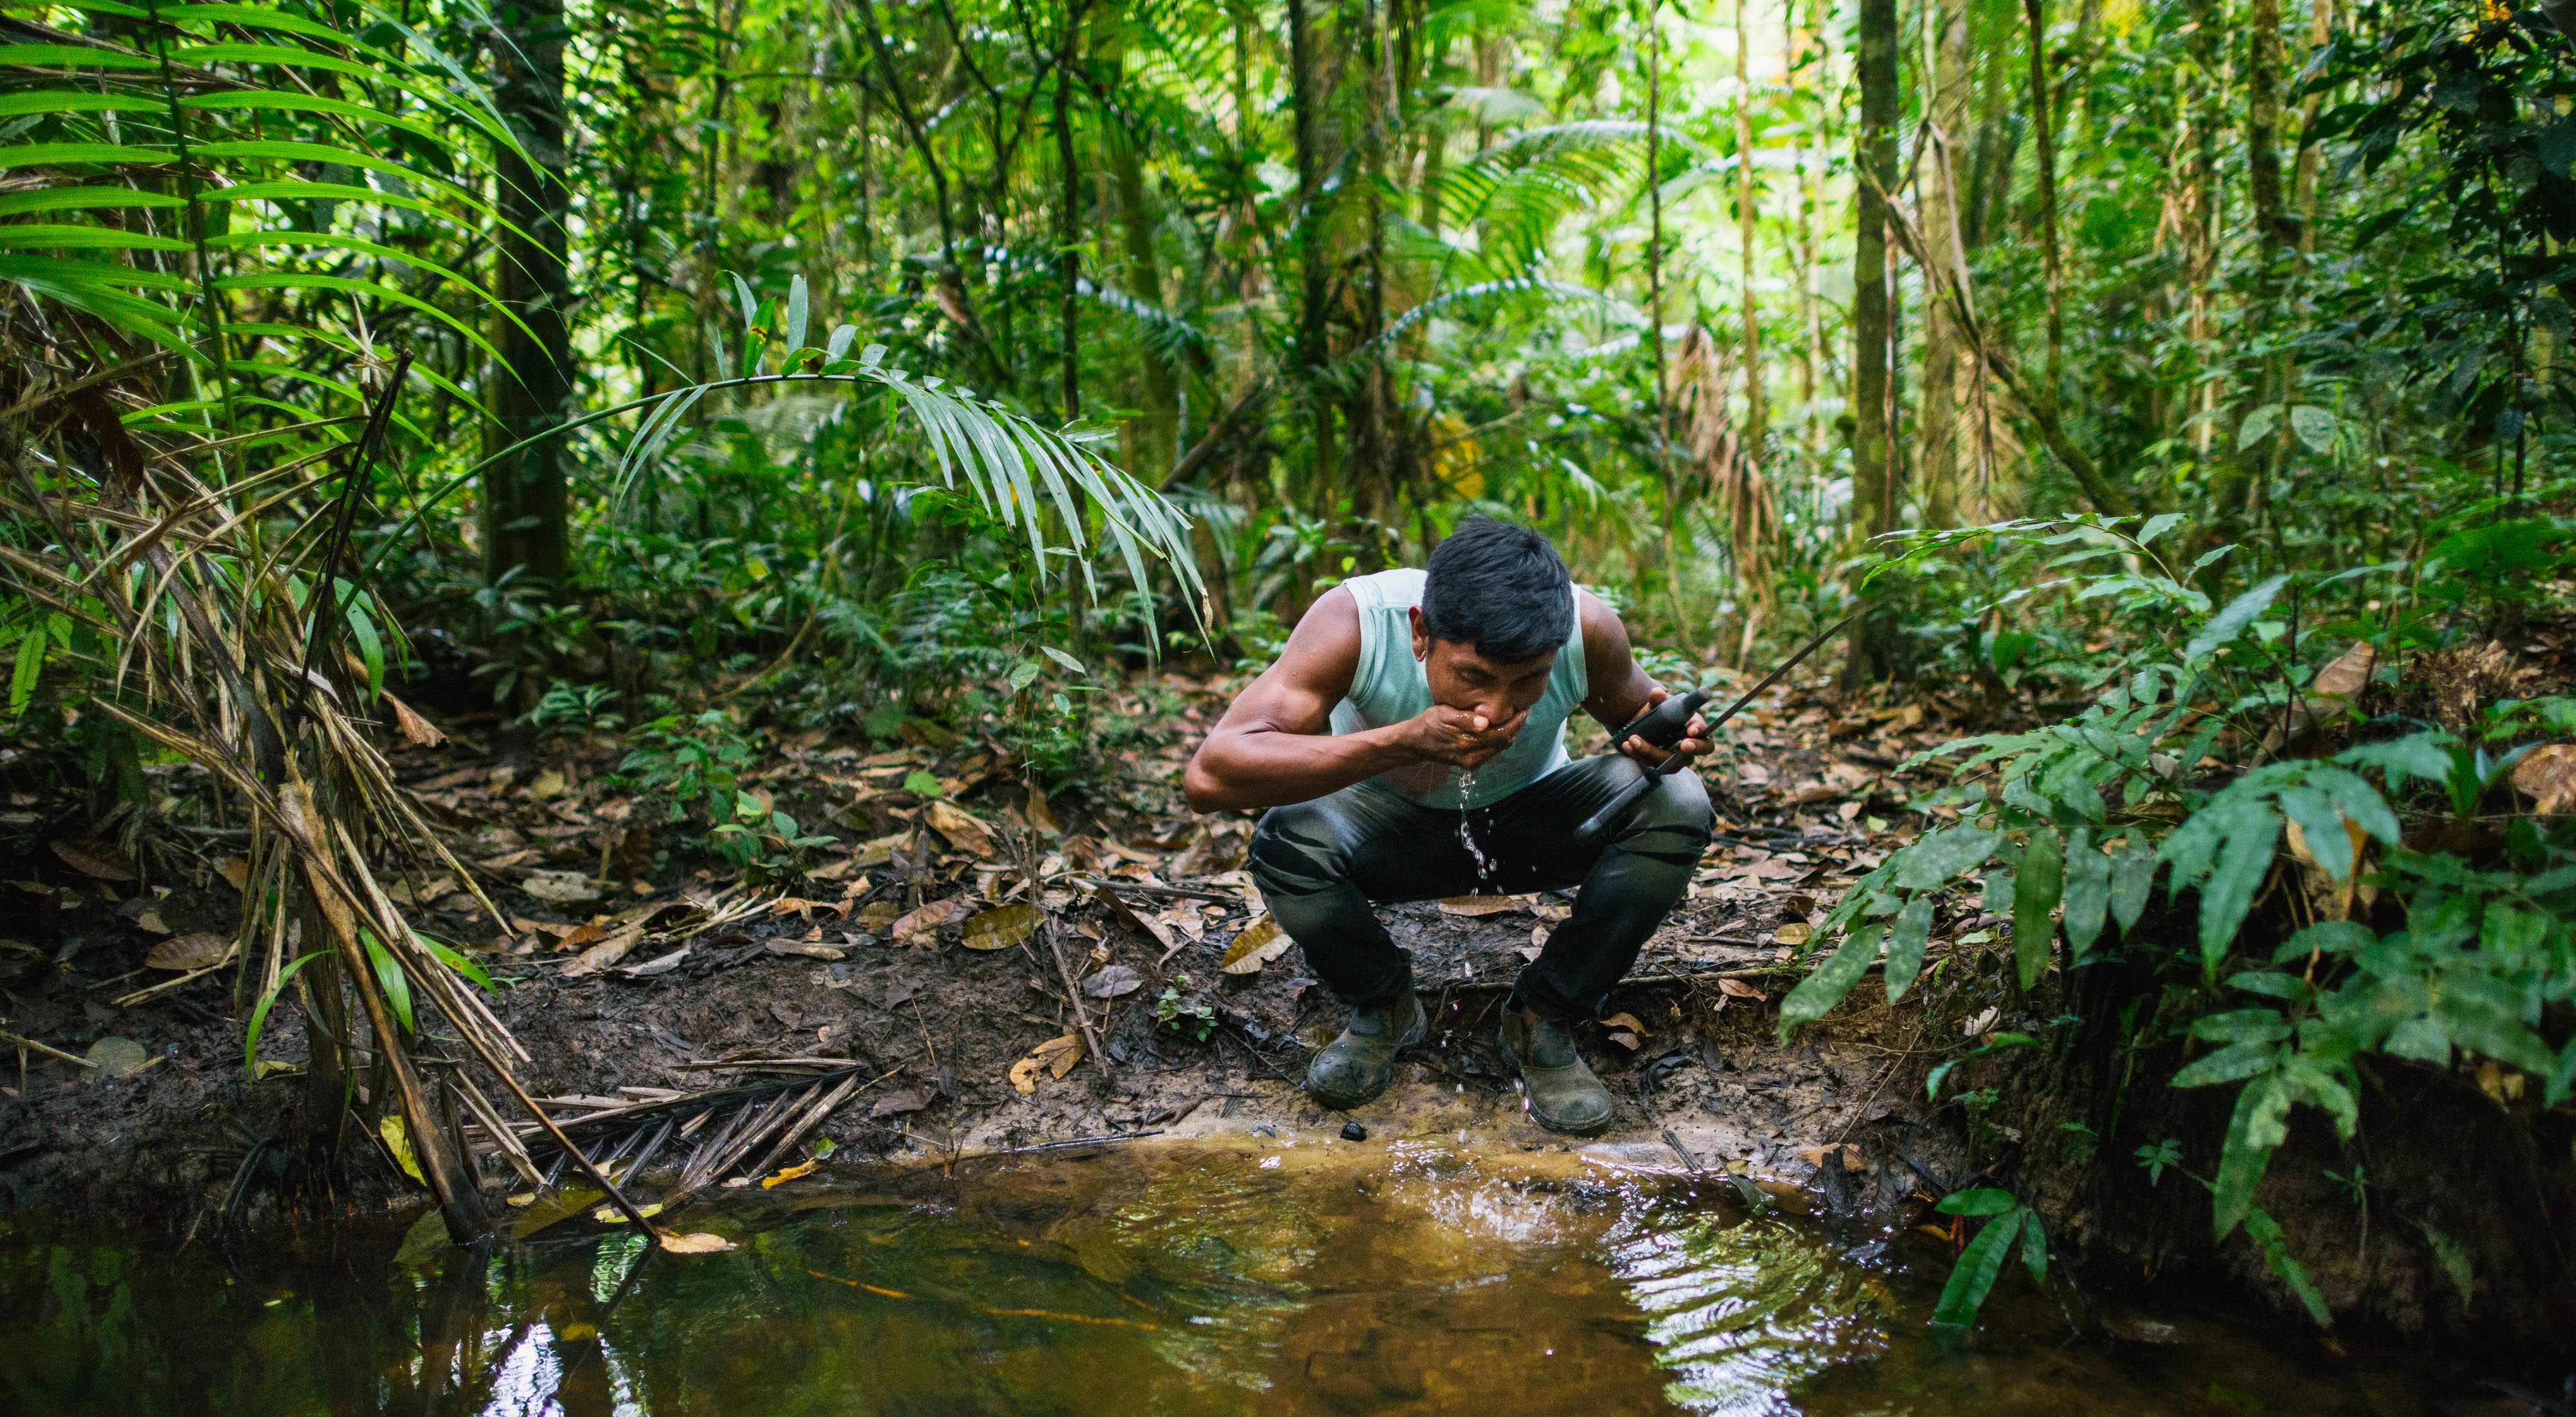 A surveyor stops for a drink of water in a forest near the Pot-Kro Village in the Brazilian Amazon